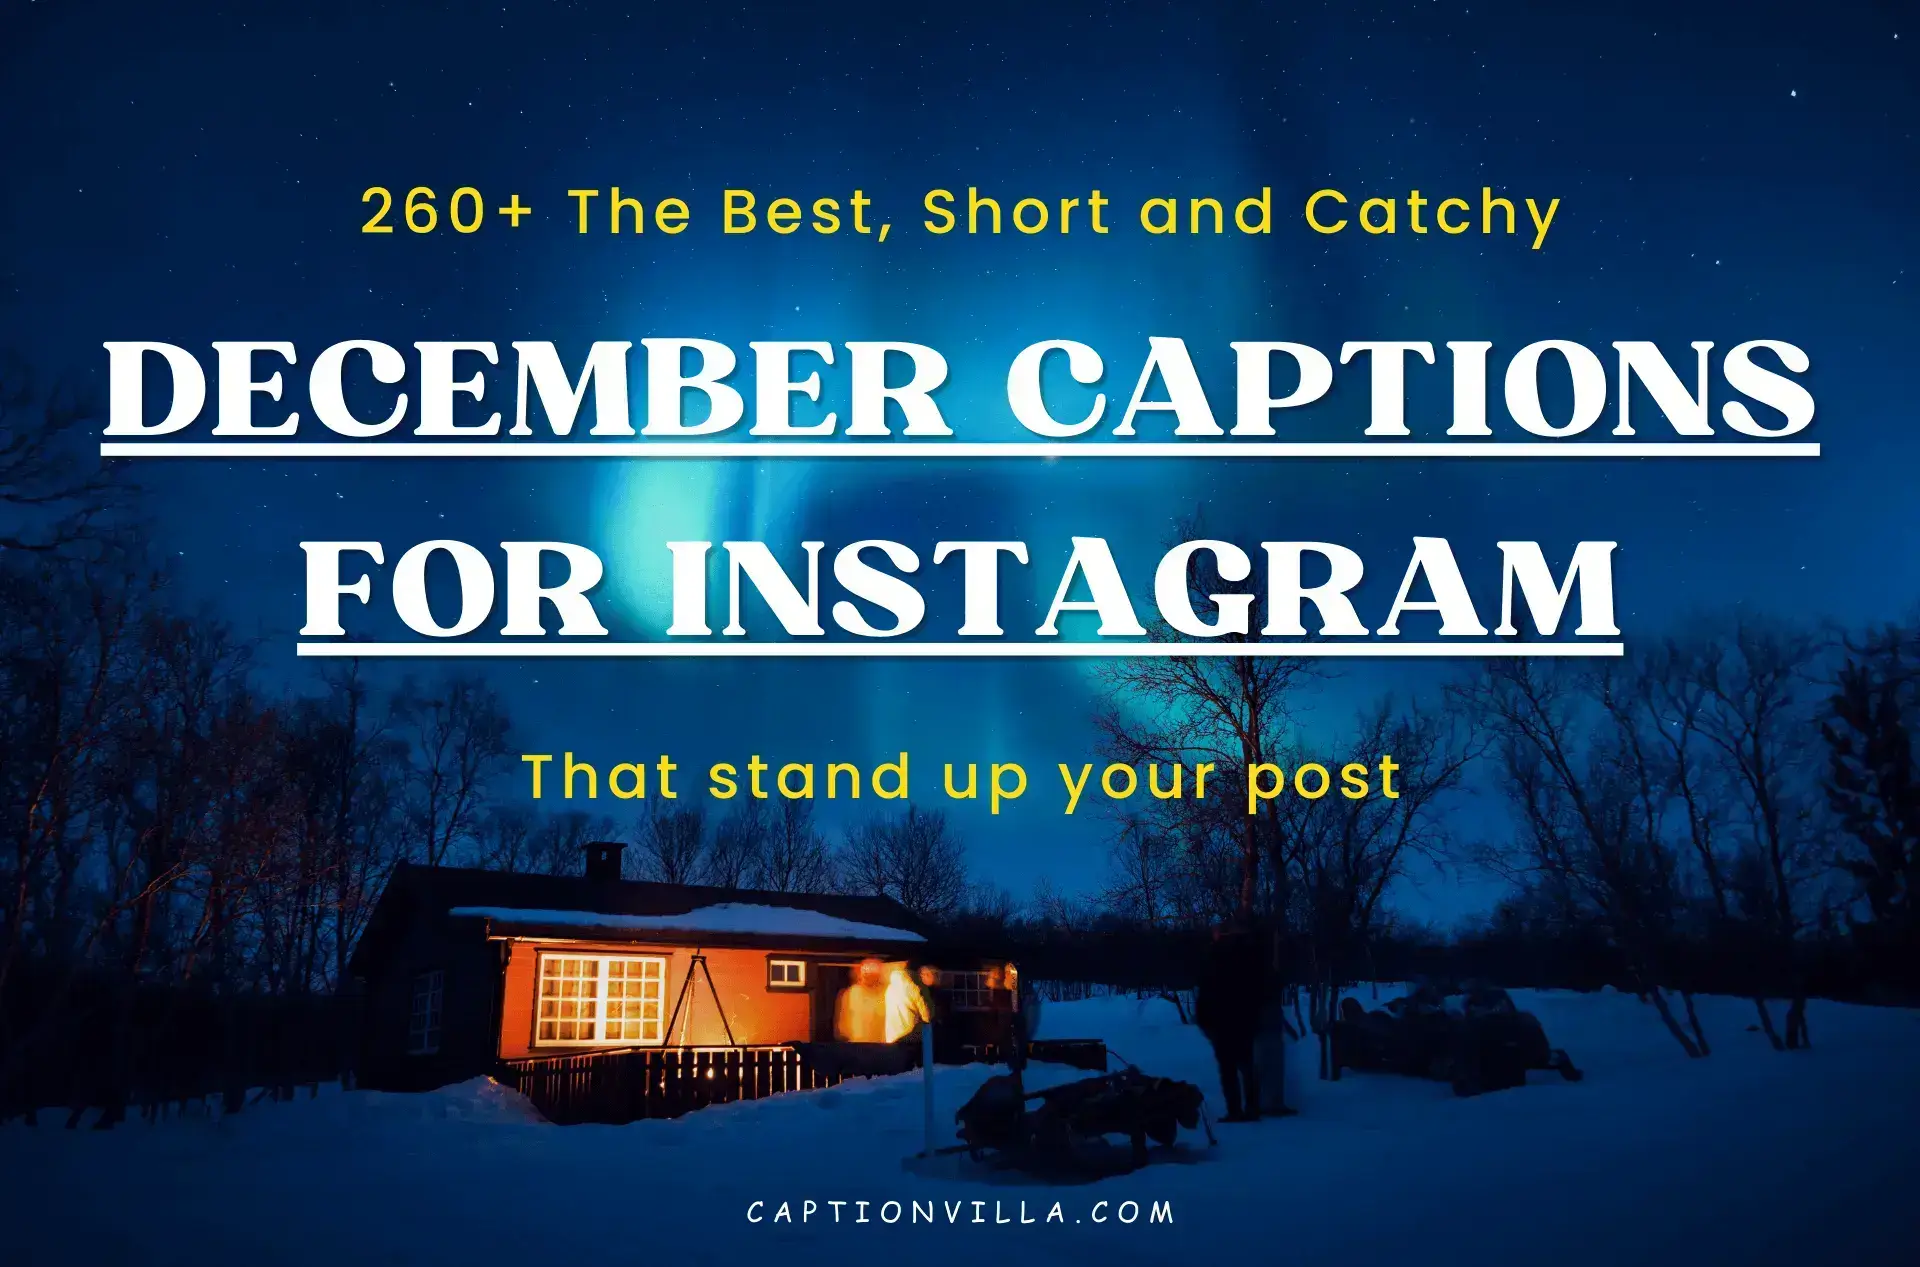 This image includes the title of December Captions for Instagram.